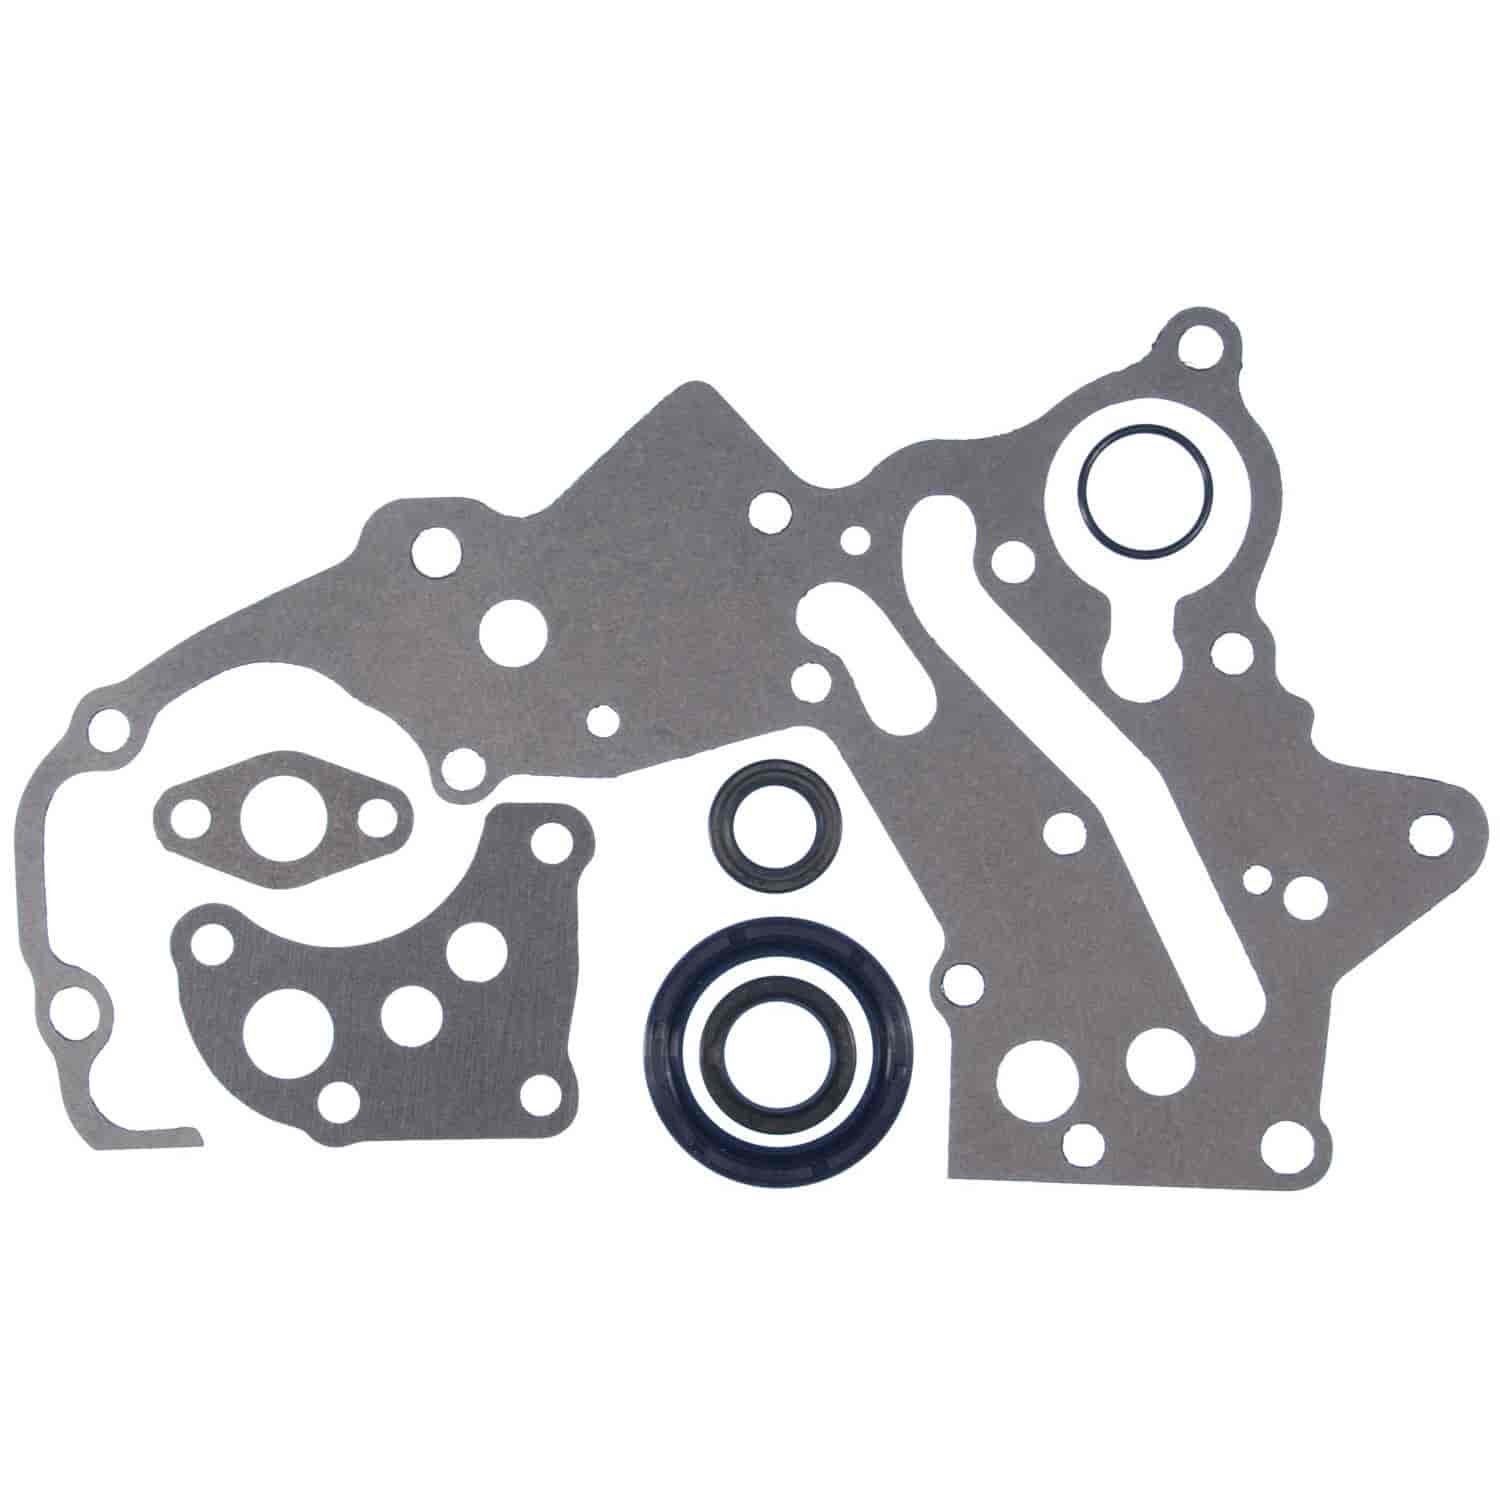 Timing Cover Set Chry  Dod-Pass&Trk  Eagle  for Hyundai  Mit-Pass&Trk  Dod-Pass&Trk 122 2.0L